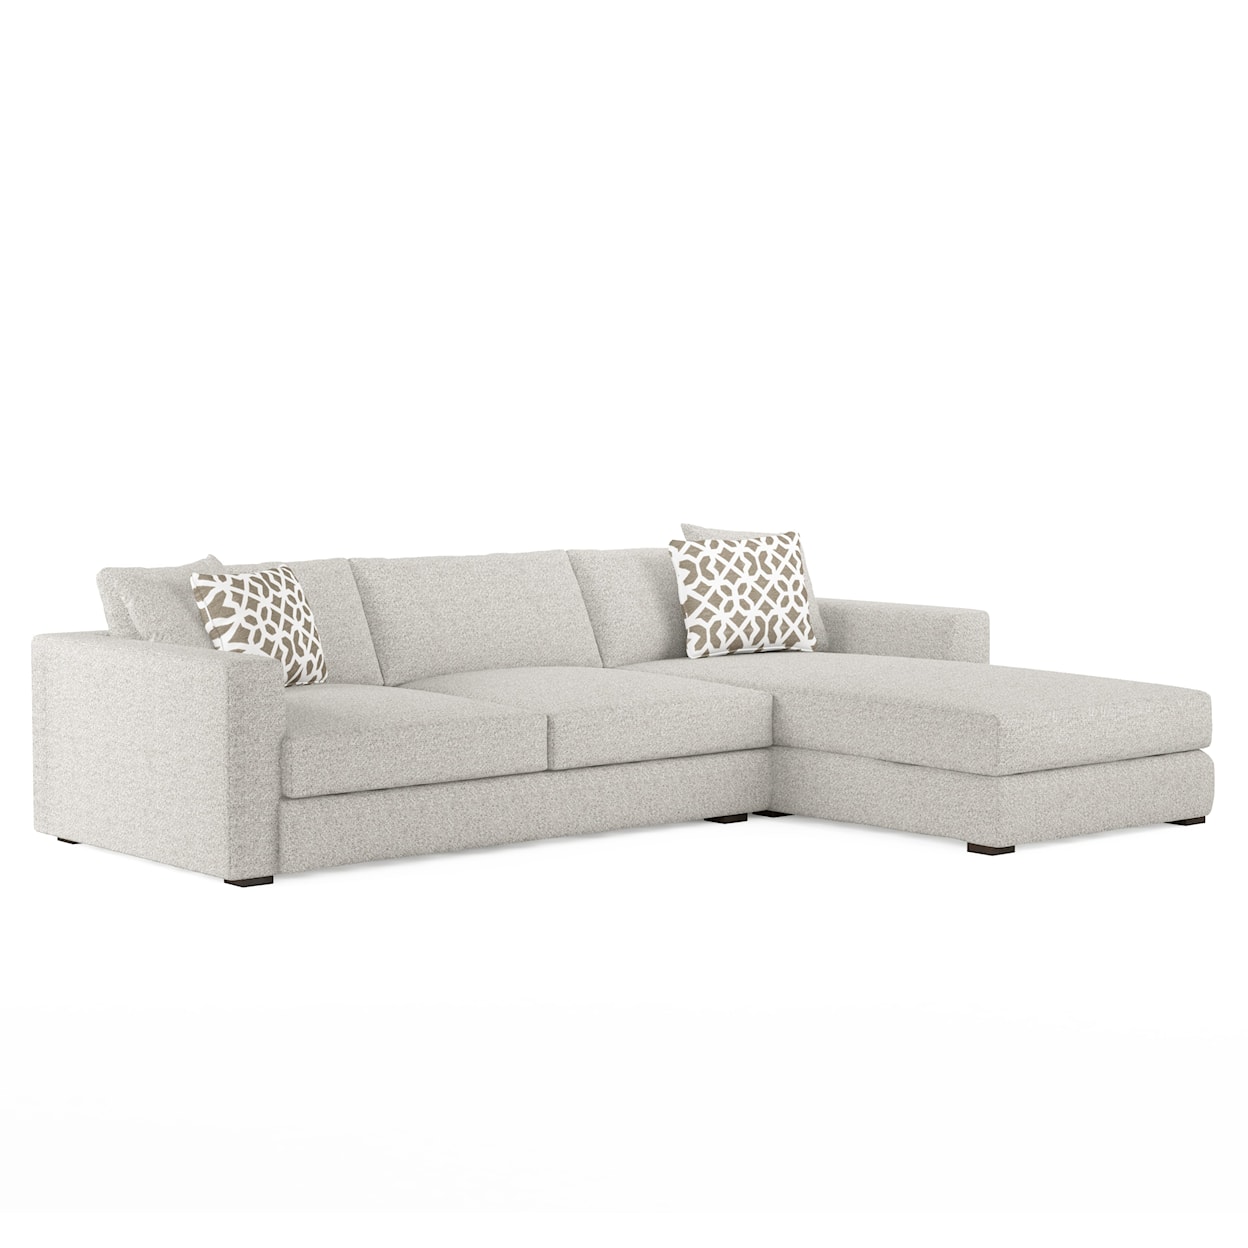 A.R.T. Furniture Inc 780 - Scully Uph  Ryden - 2Pcs Sectional Sofa K-Pebble